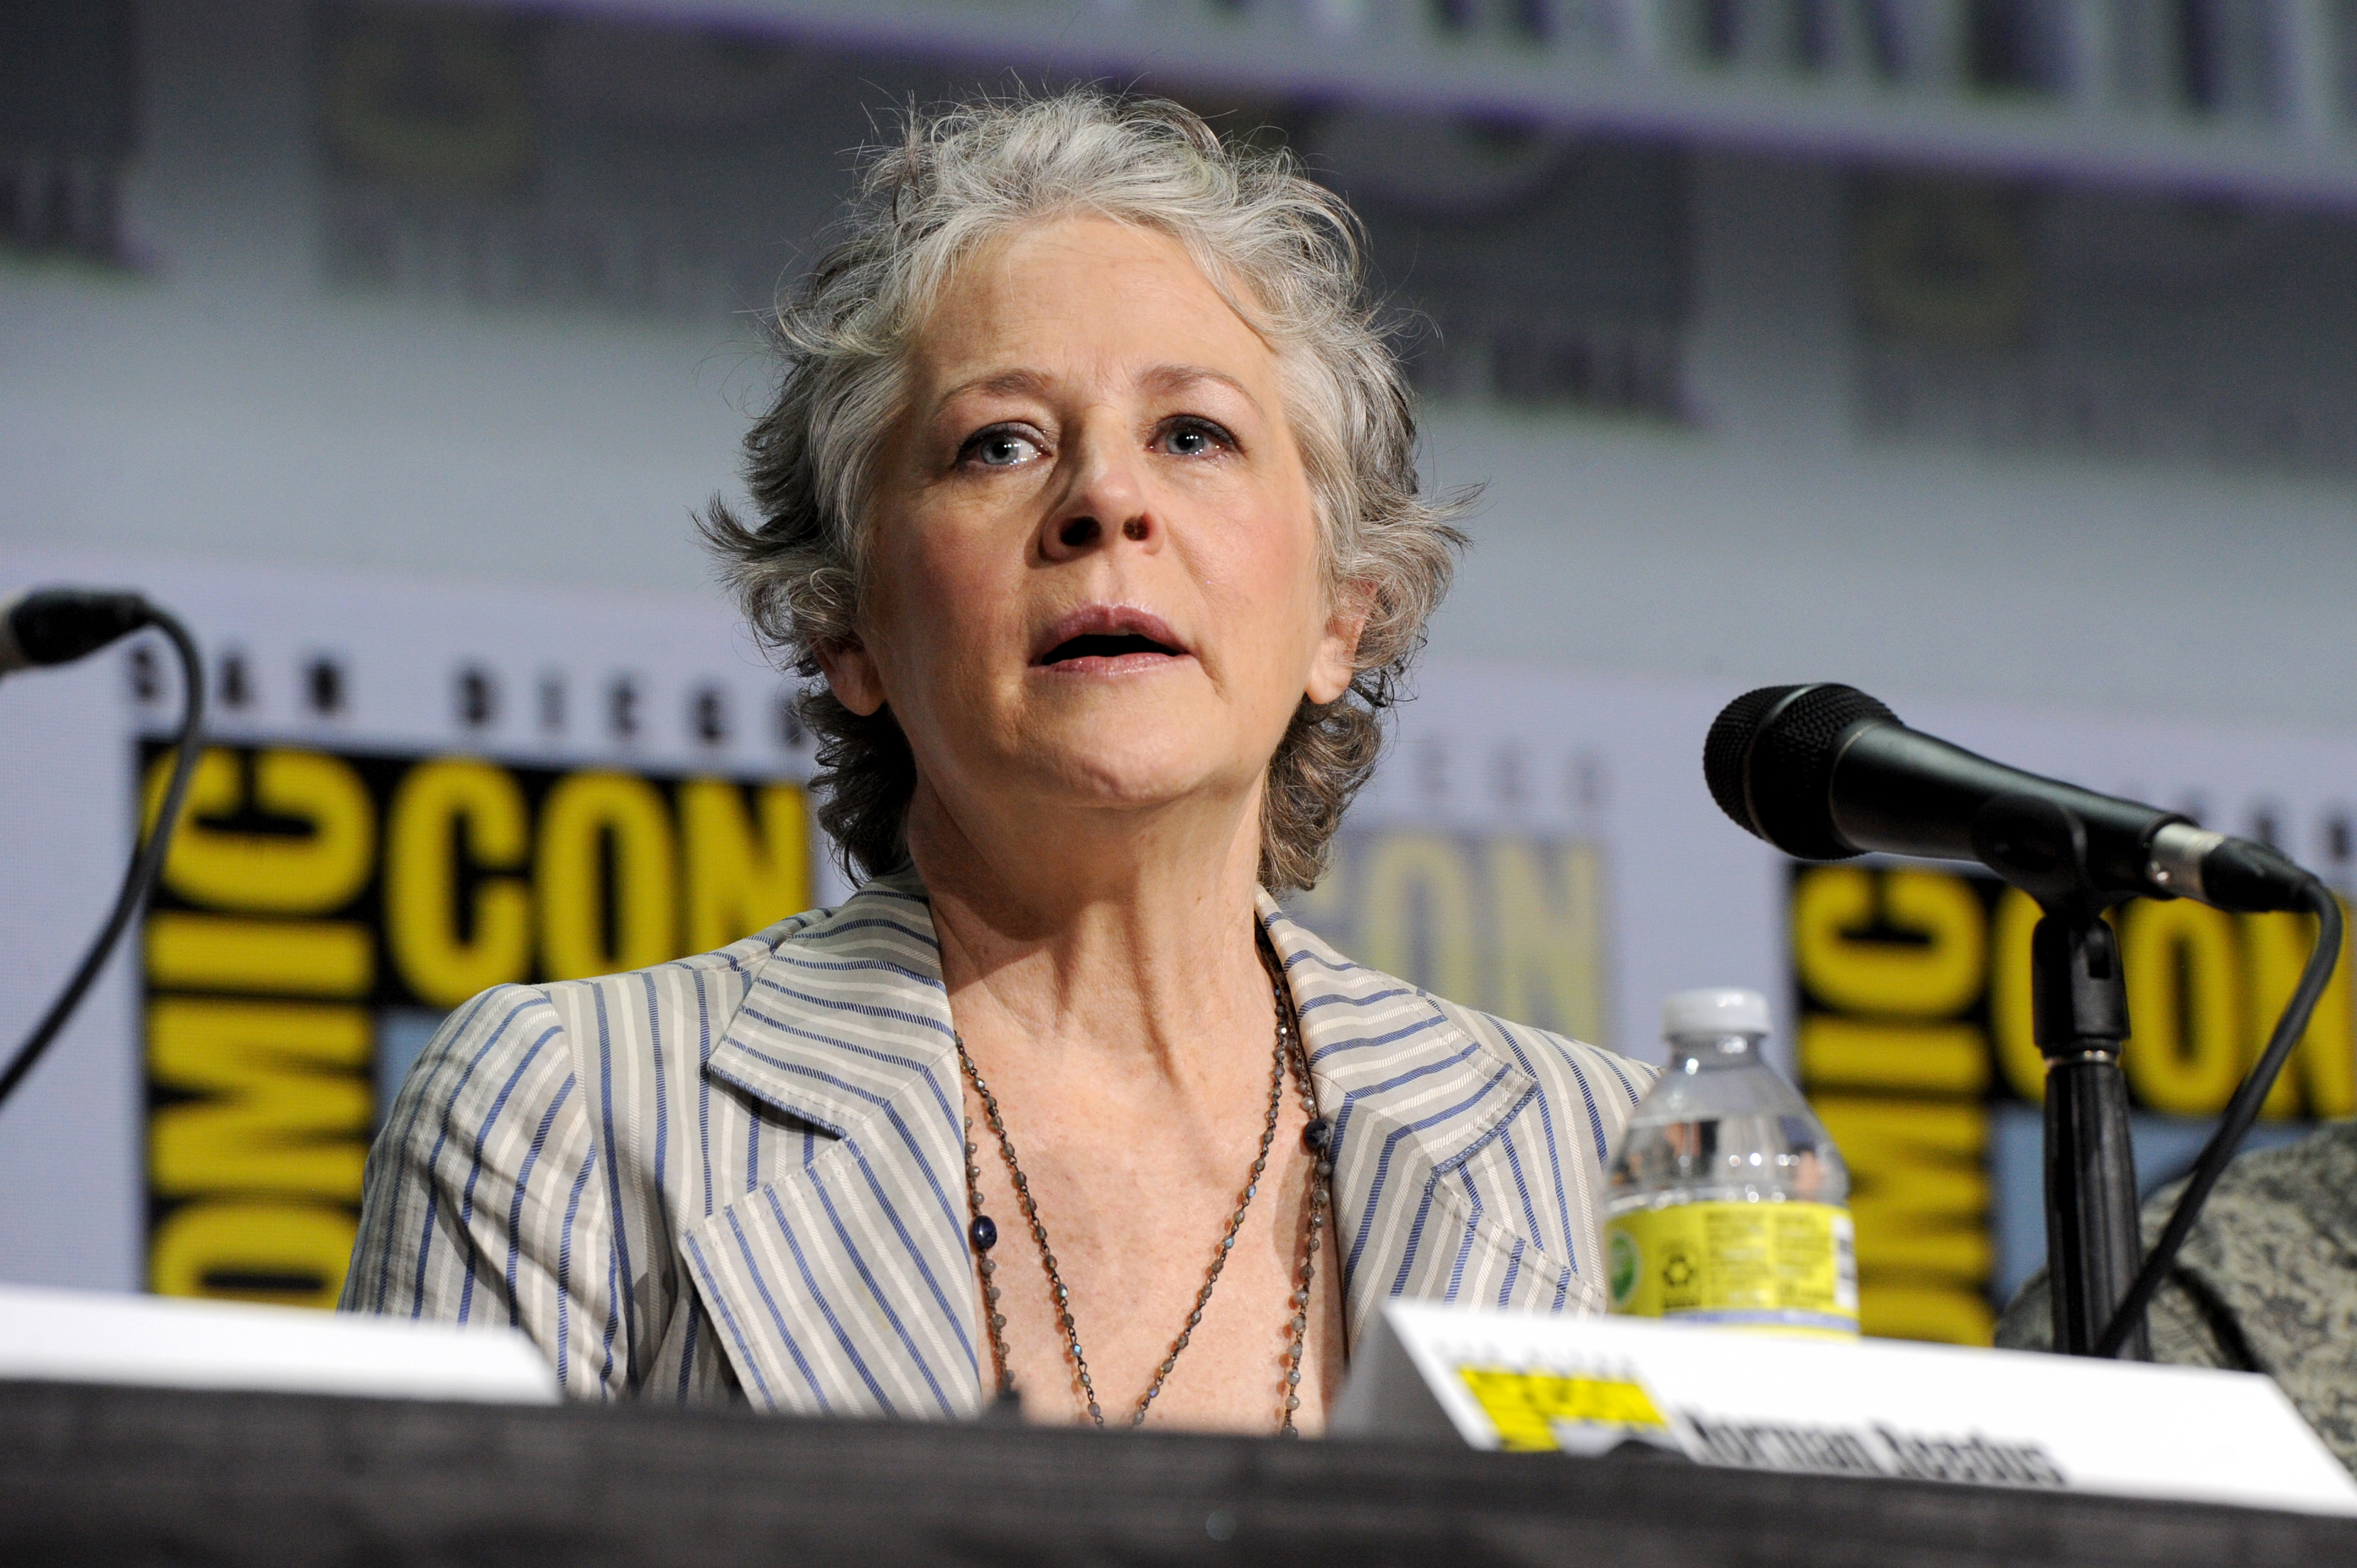 Melissa McBride at San Diego Convention Center on July 22, 2022, in San Diego, California. | Source: Getty Images